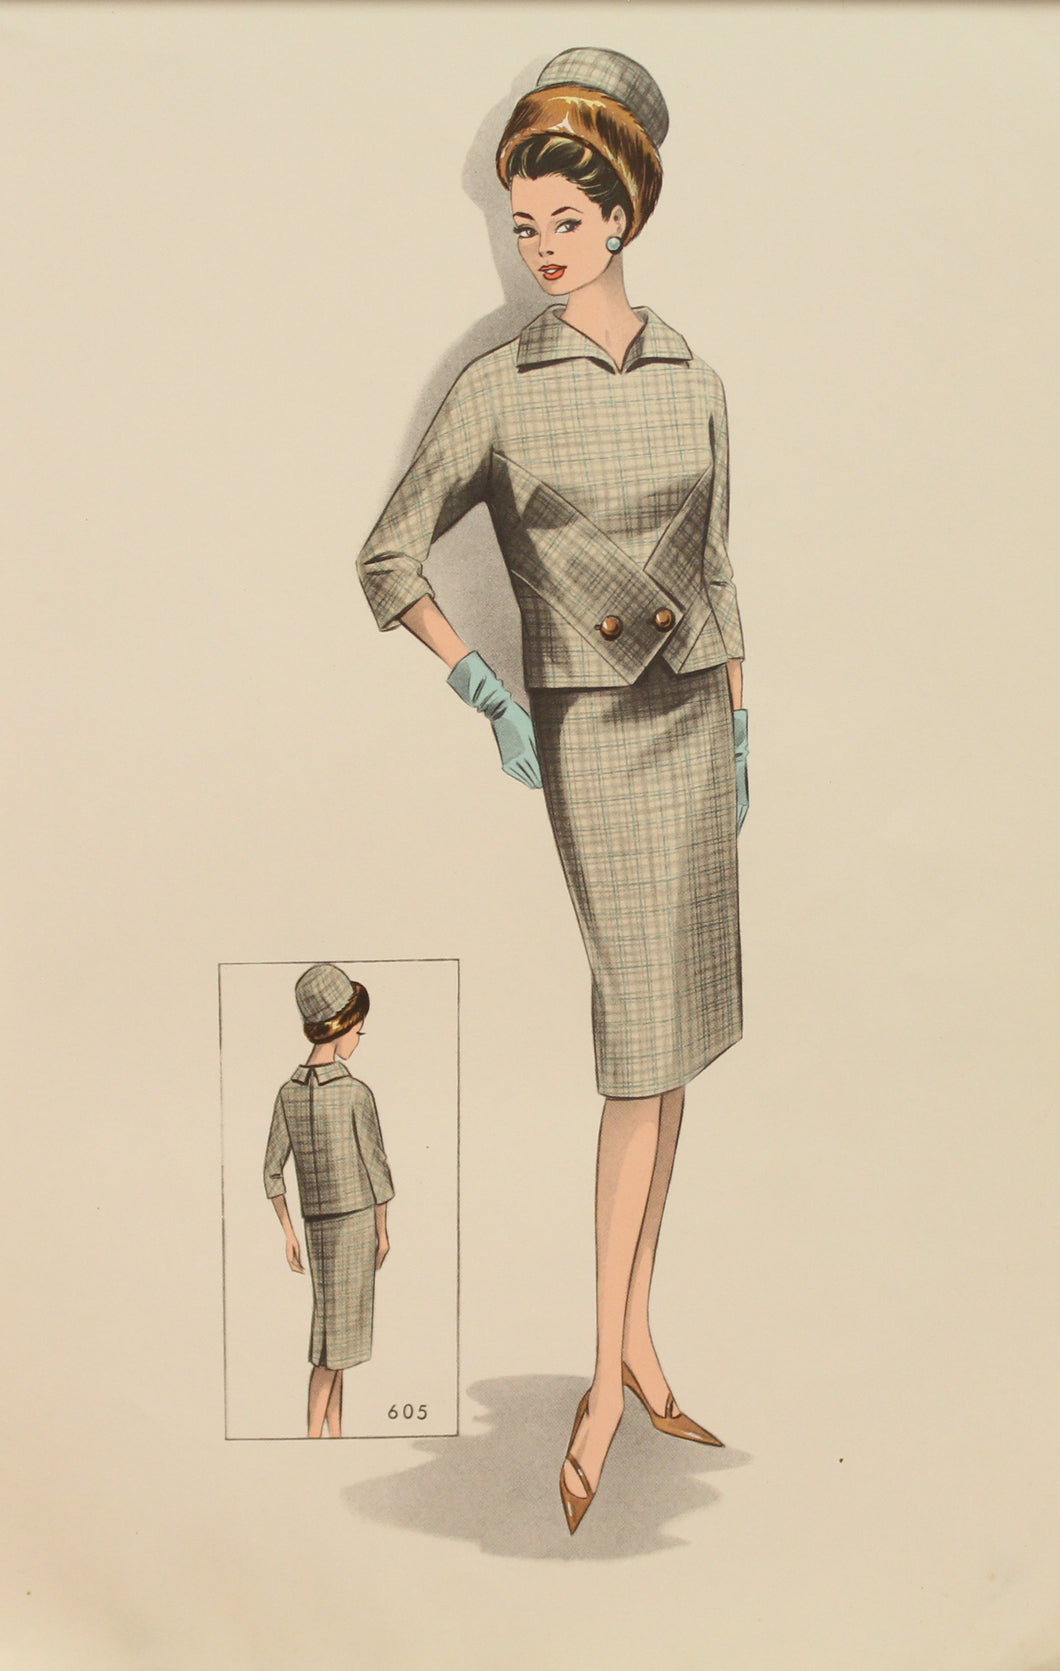 Fashion of the 60s, New Lines from the Fashions in Vienna, Mode Studio, 605, 1965